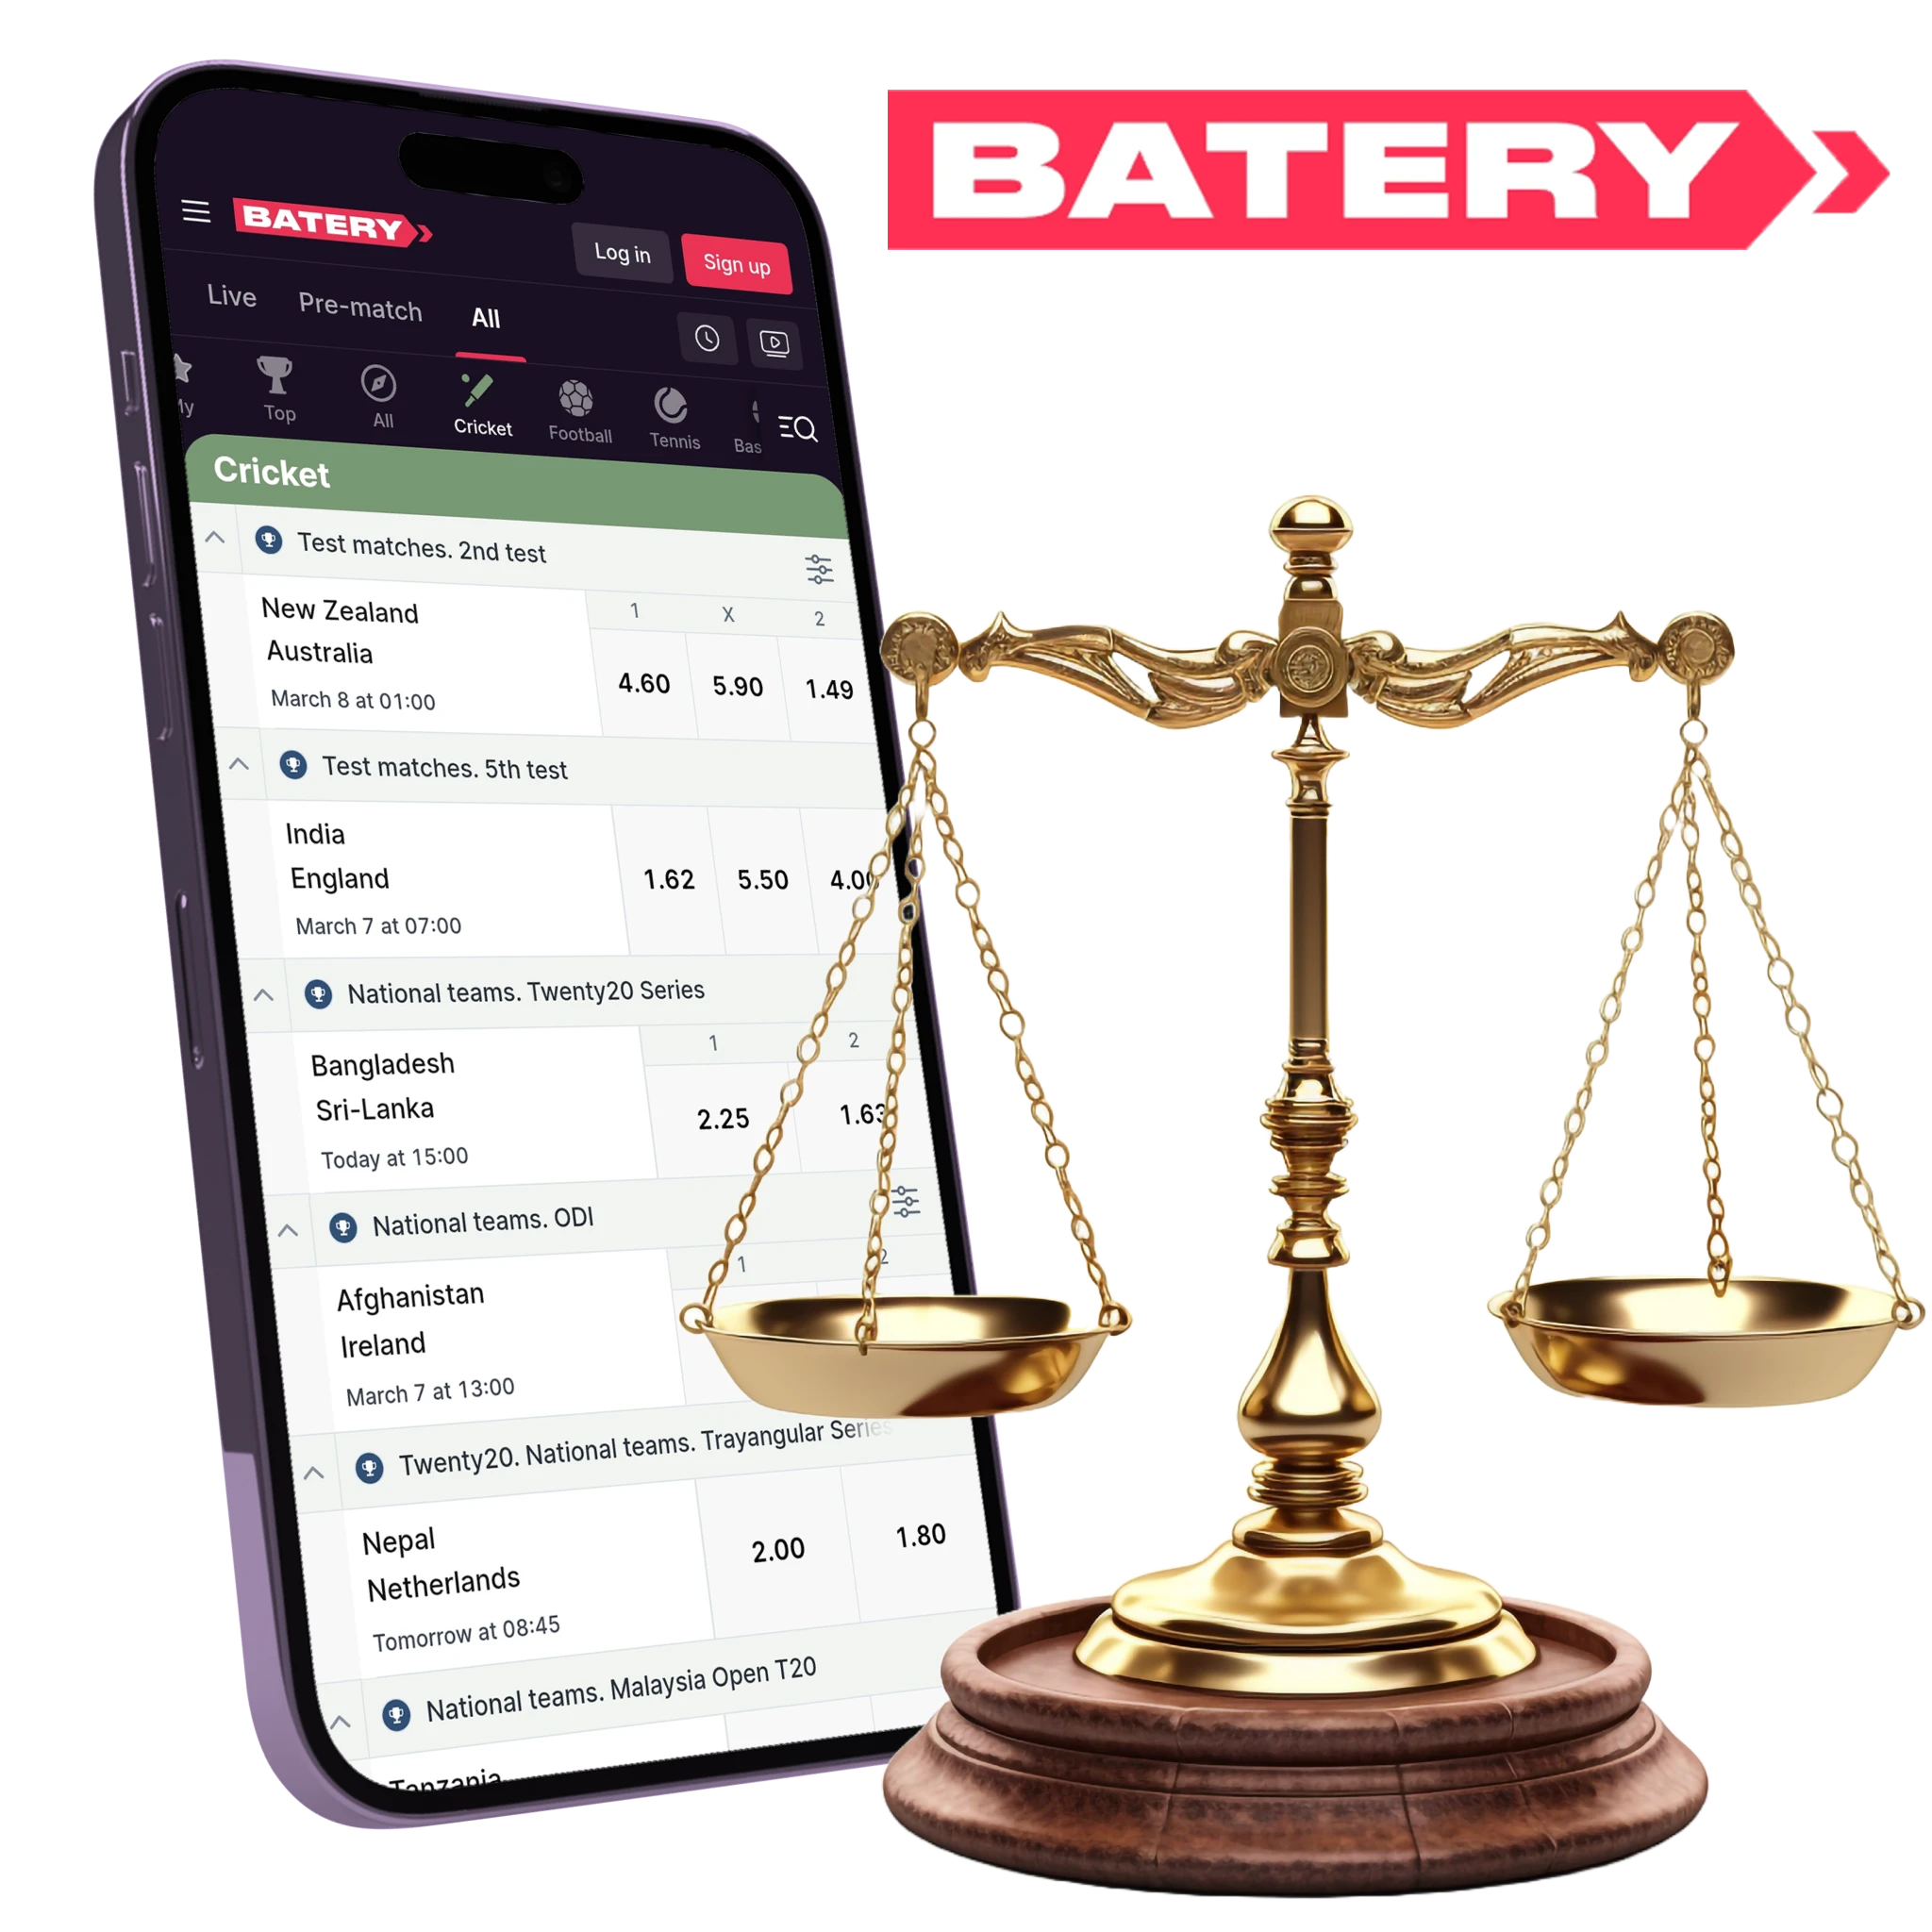 Download Batery app and enjoy legal betting on cricket.